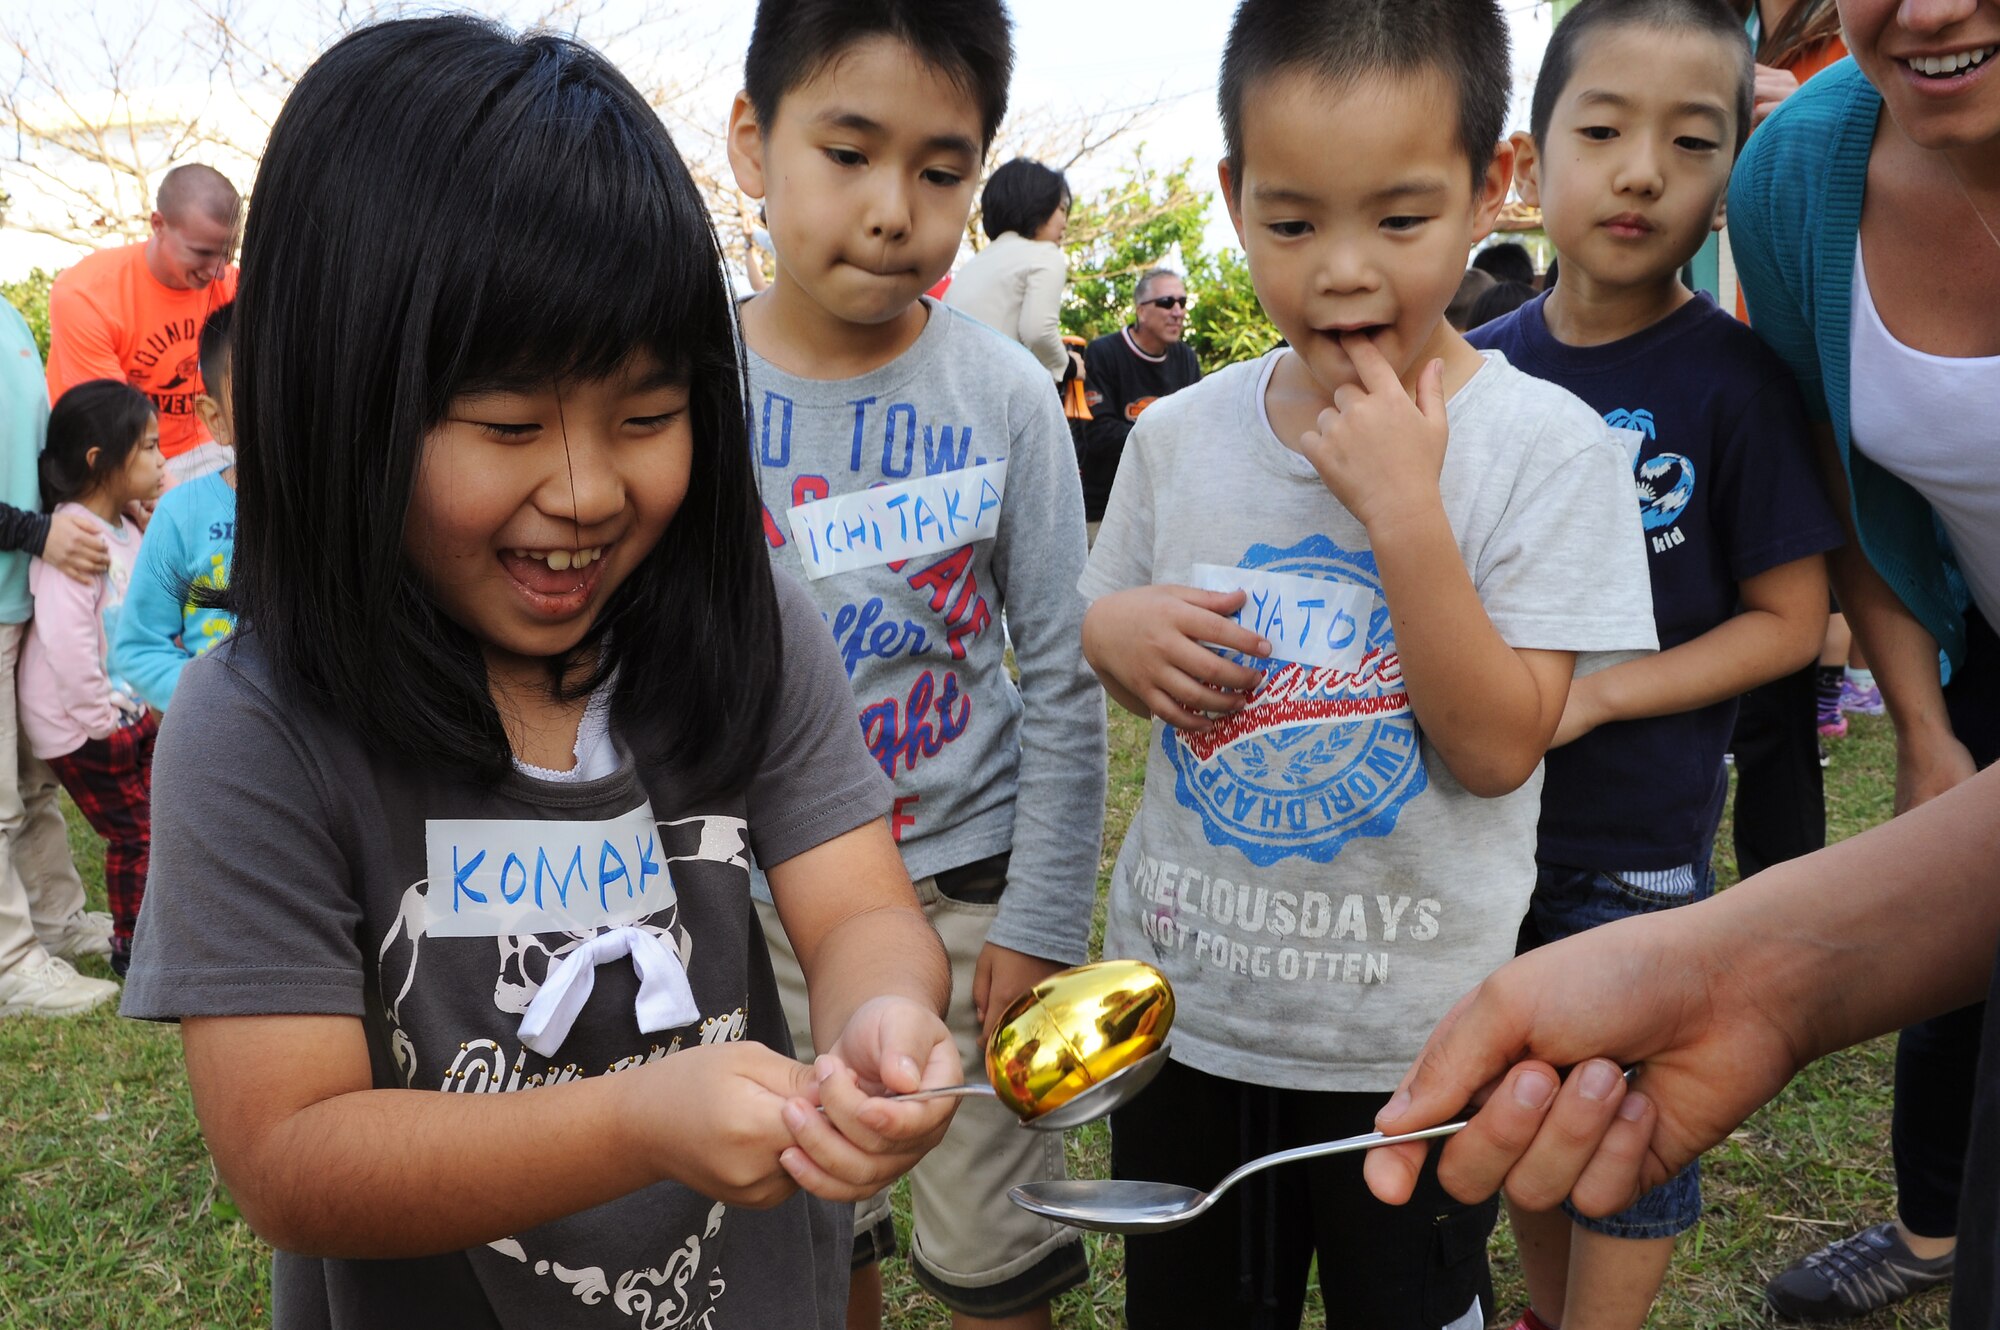 A child from the Midori School-Age Program transfers a plastic egg from one spoon to another during a relay race in Okinawa City, Japan, March 26, 2015. The relay race was one of several games and activities set up for local children by members of the Wisconsin Air National Guard's 115th Fighter Wing. (U.S. Air Force photo by Airman 1st Class Zade C. Vadnais)